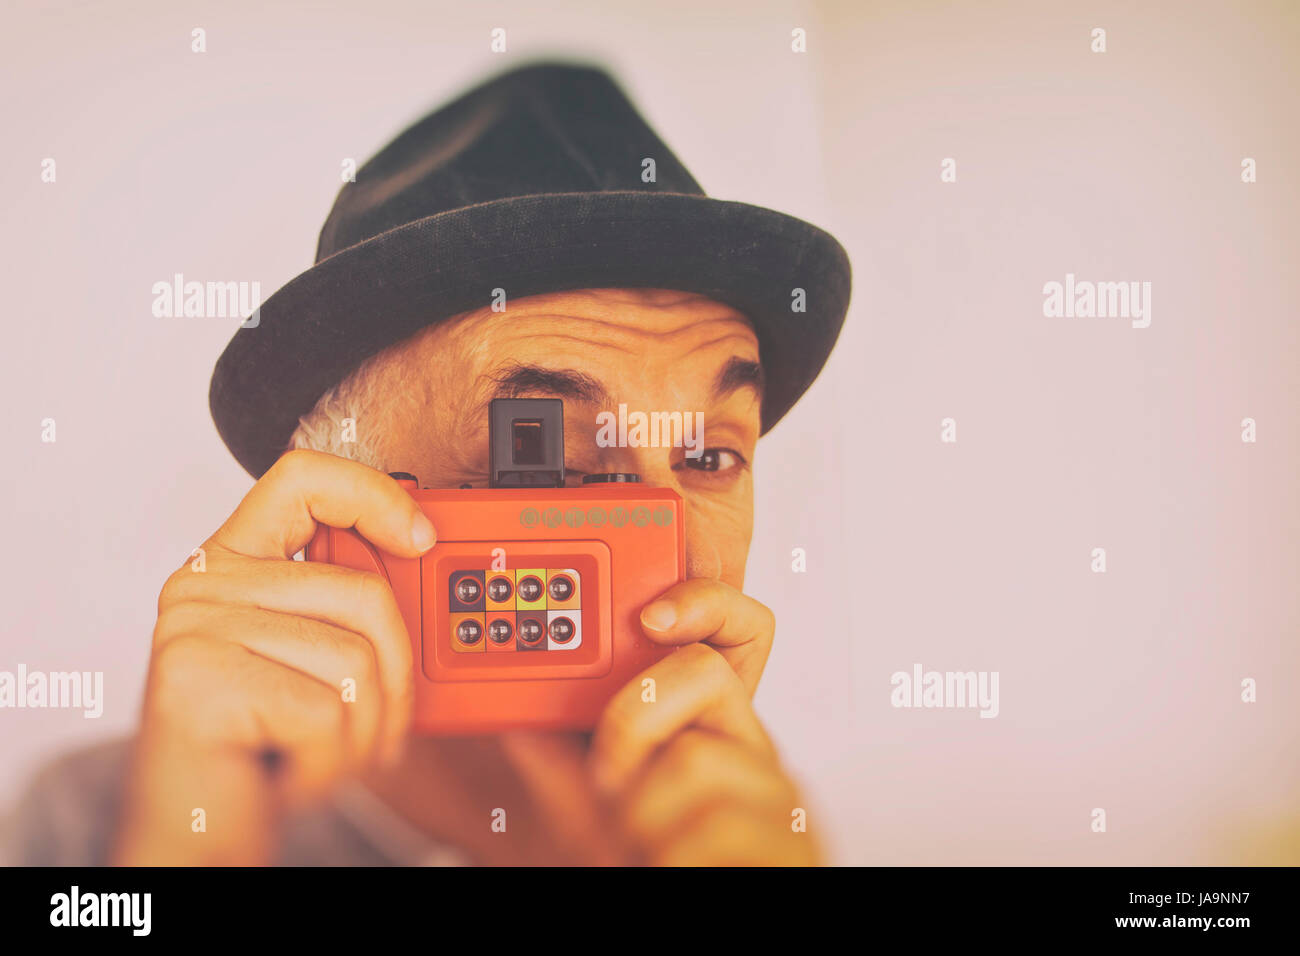 man wearing a trilby hat taking a picture with a Lomography Oktomat plastic camera Stock Photo